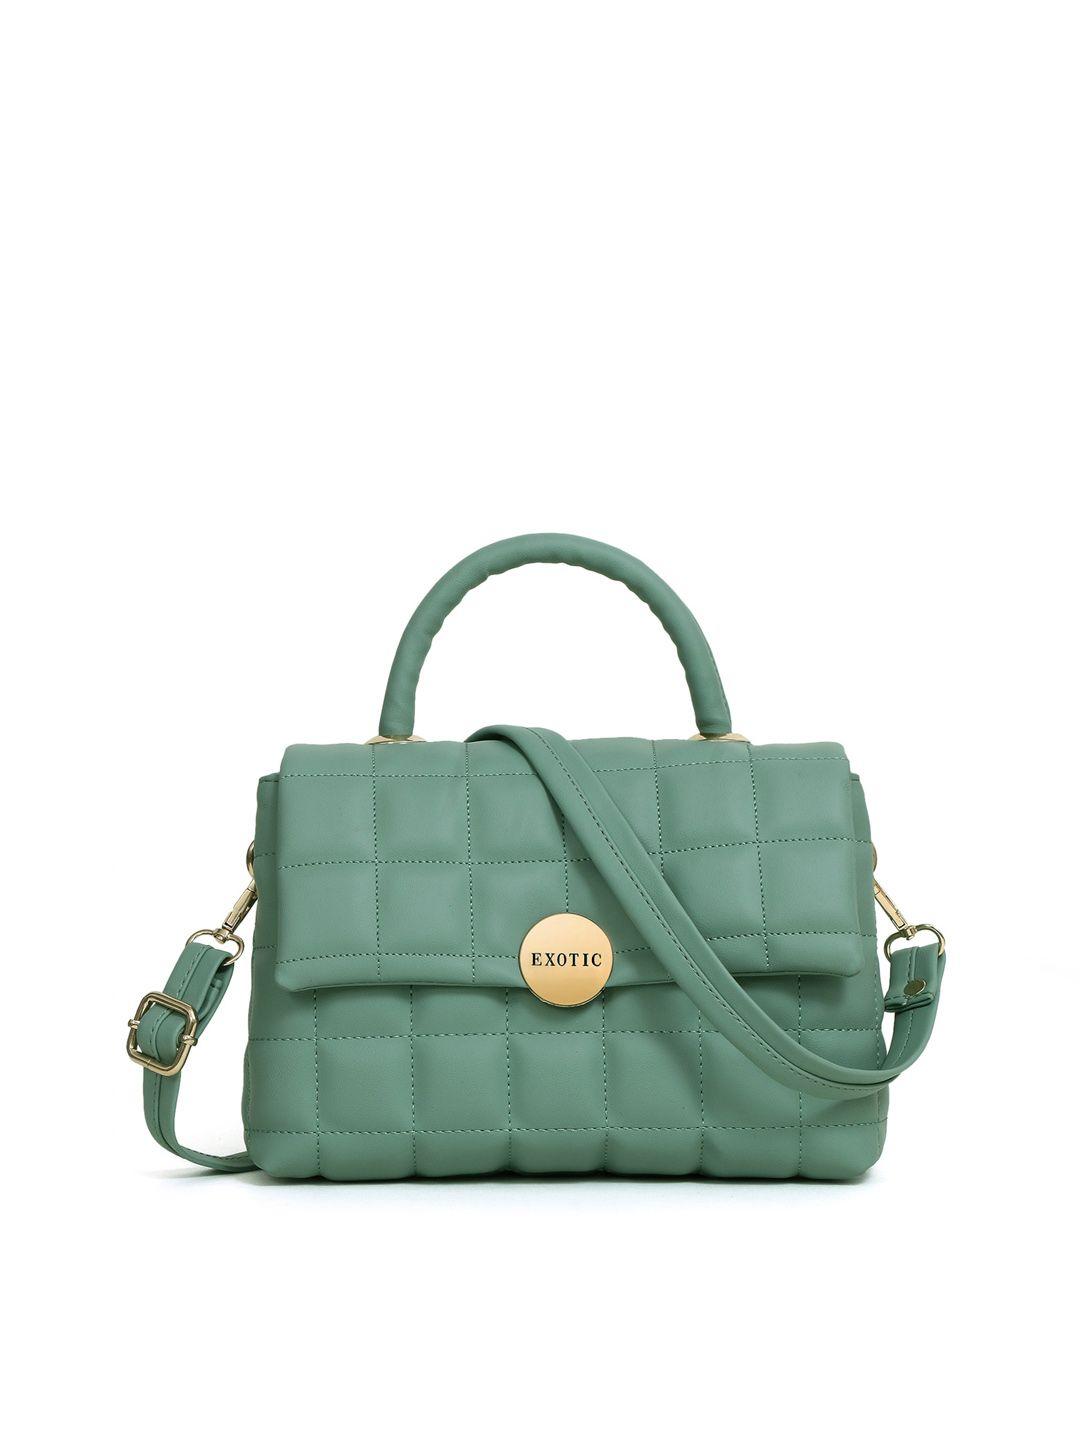 exotic textured structured handheld bag with quilted